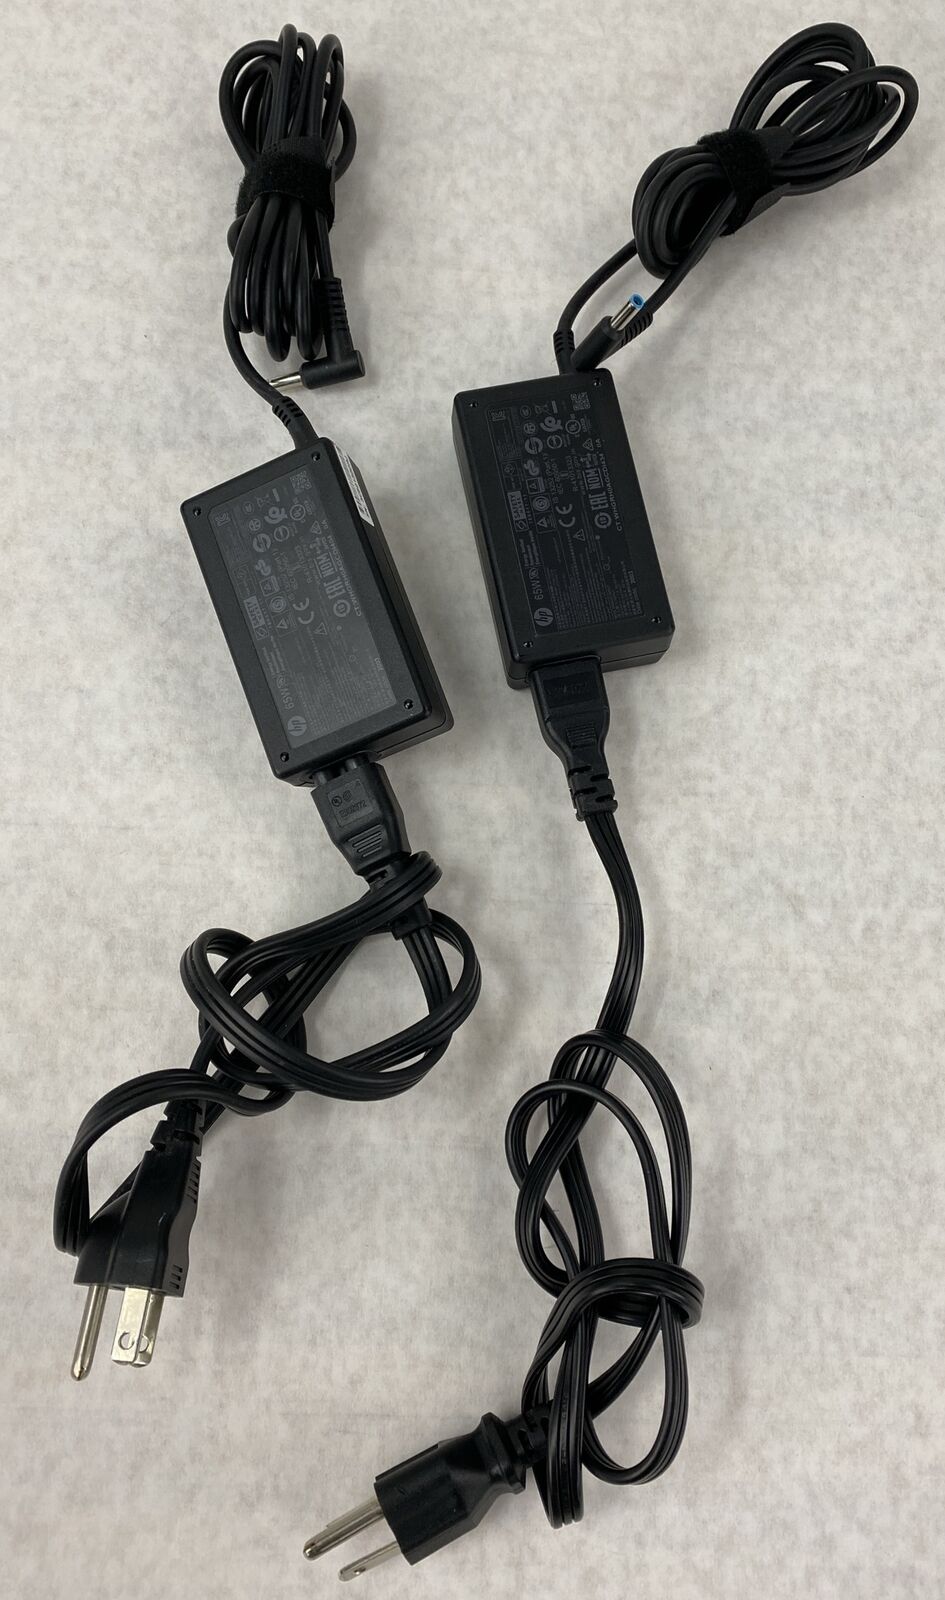 Lot( 2 ) HP L25298-002 Laptop Charger 65W Power Adapter 710412-001 Blue Tip